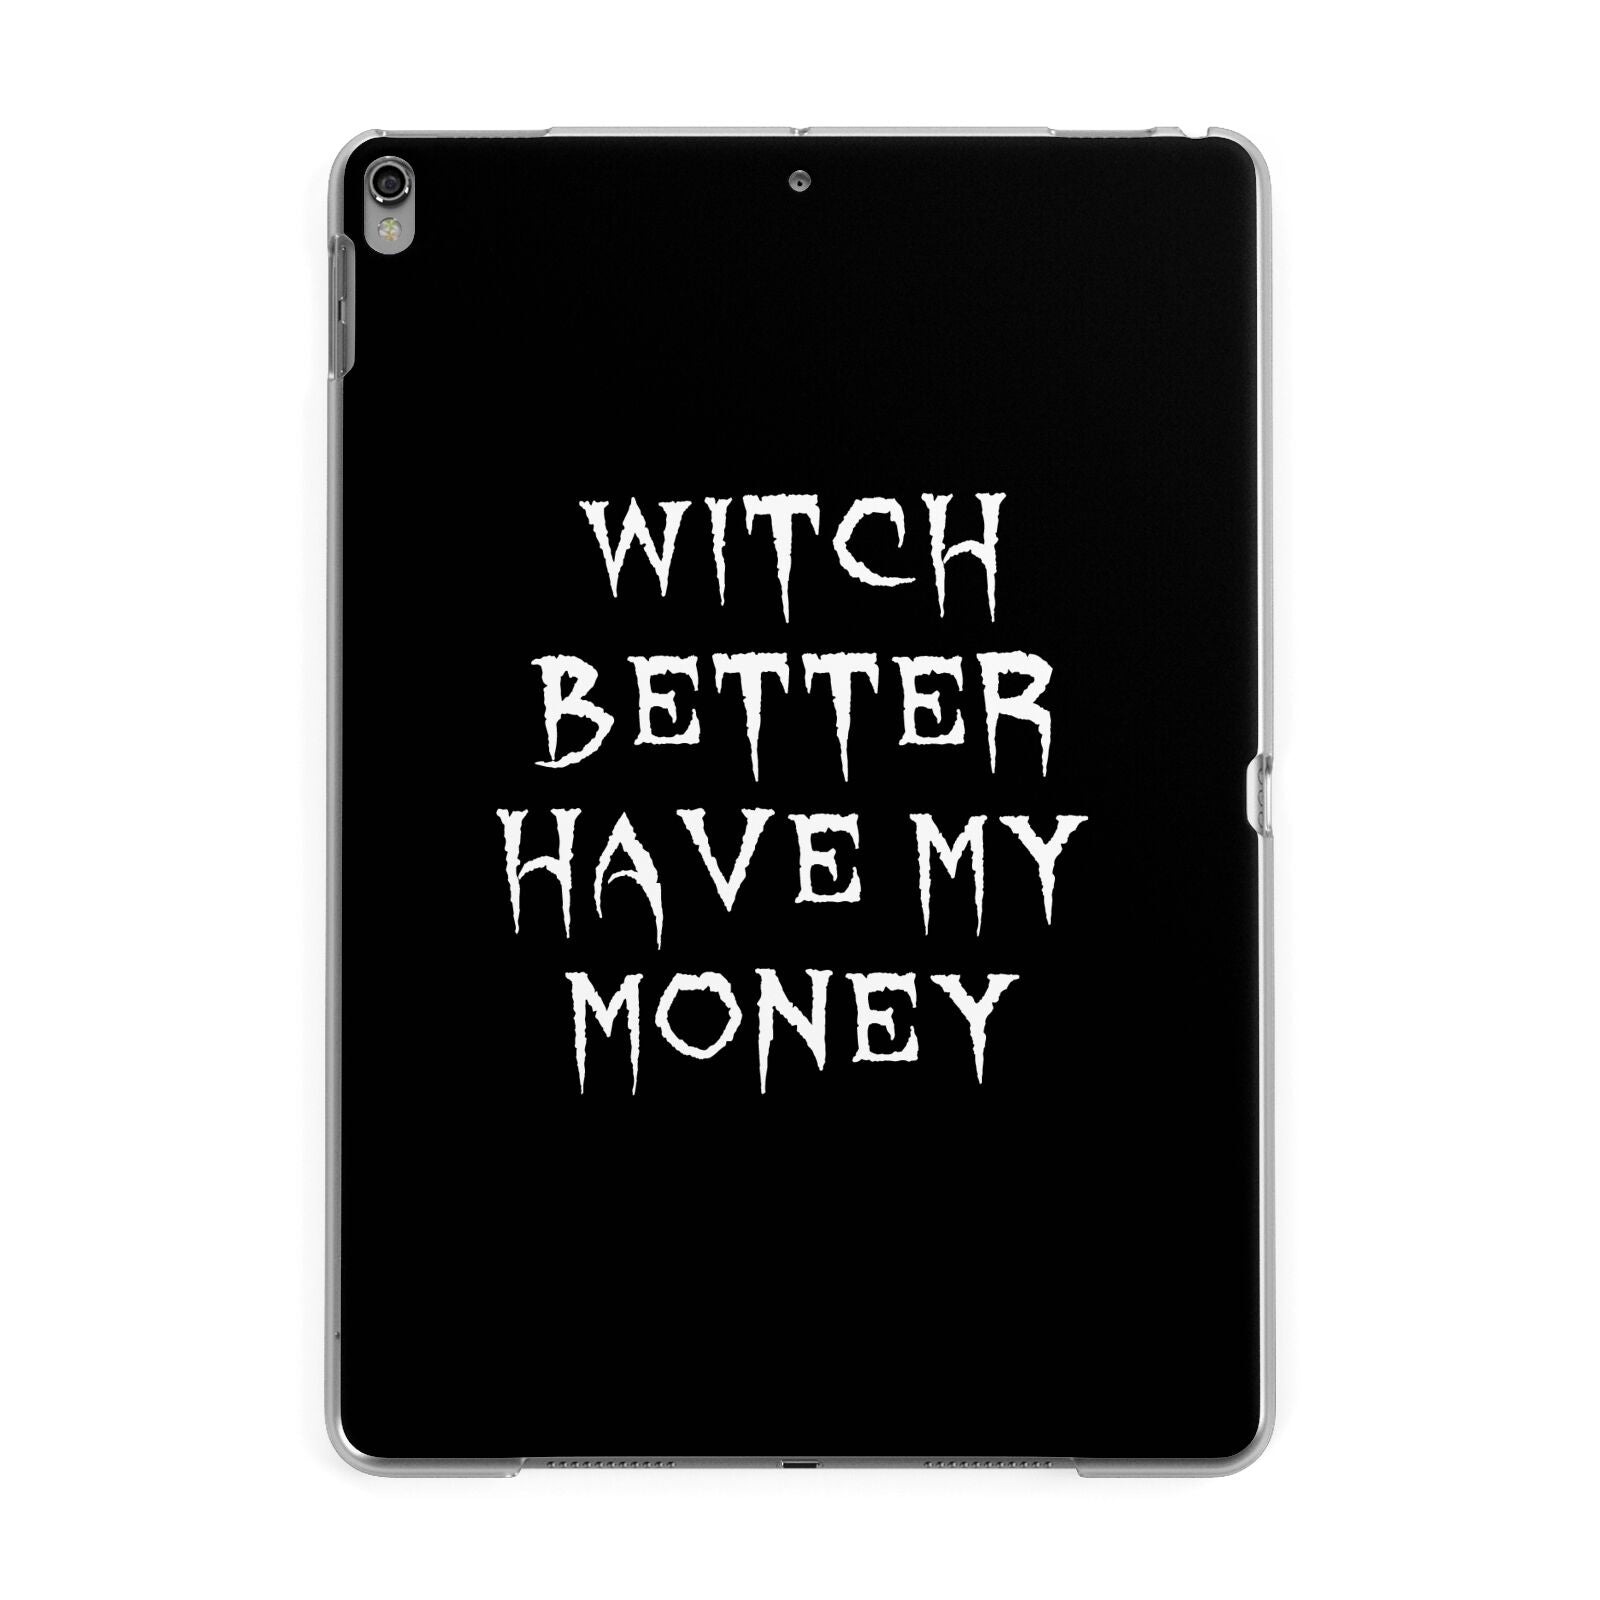 Witch Better Have My Money Apple iPad Grey Case